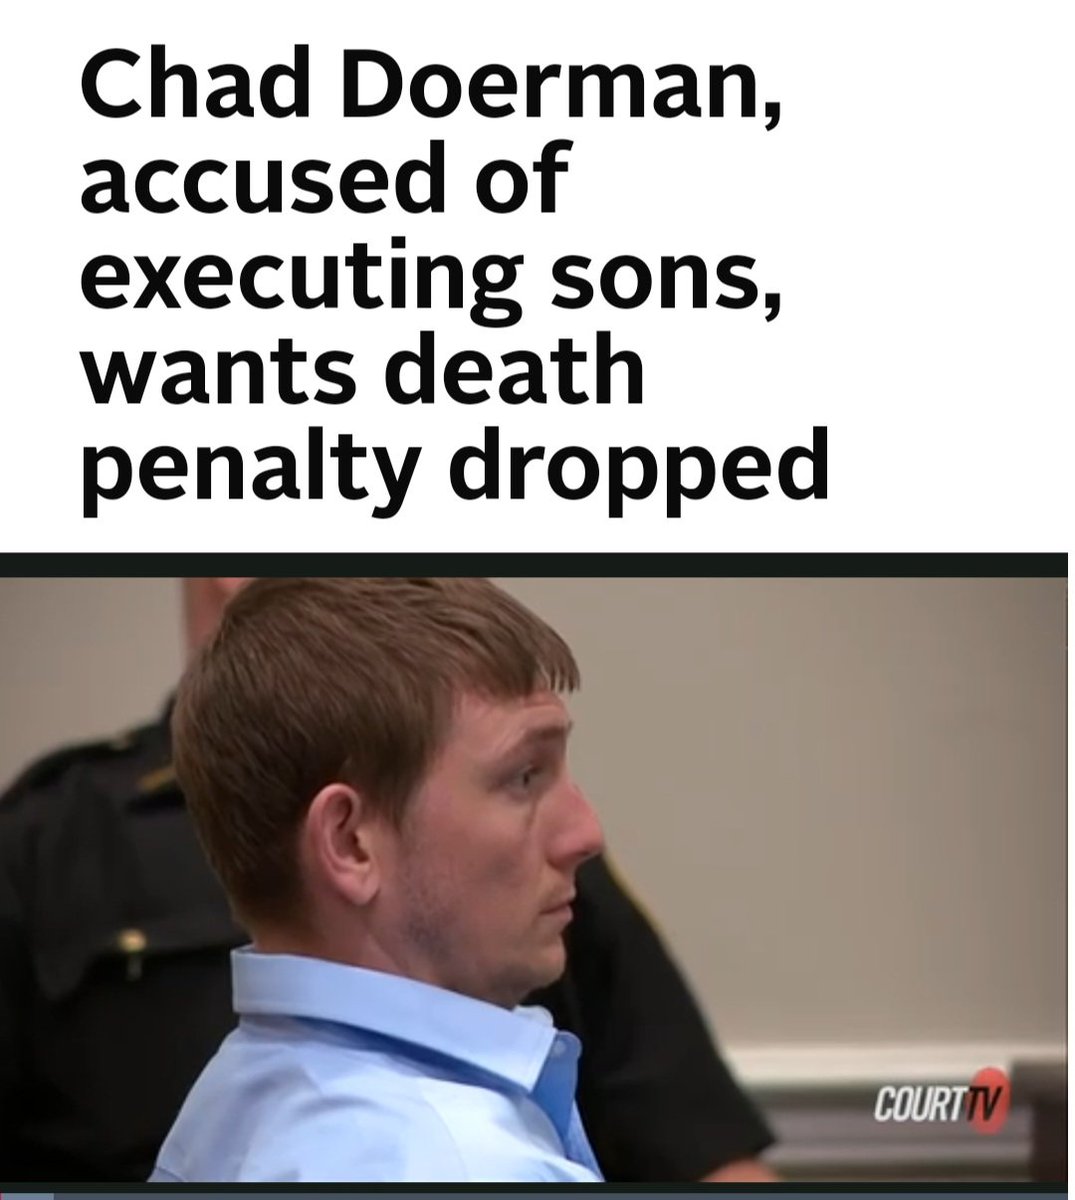 The Serious Mental Illness defense, if successful, only removes the death penalty as a legal option- nothing else. Read more here: facebook.com/share/p/Qzc4A6… #ChadDoerman #AggravatedMurder #Murder #DeathPenalty